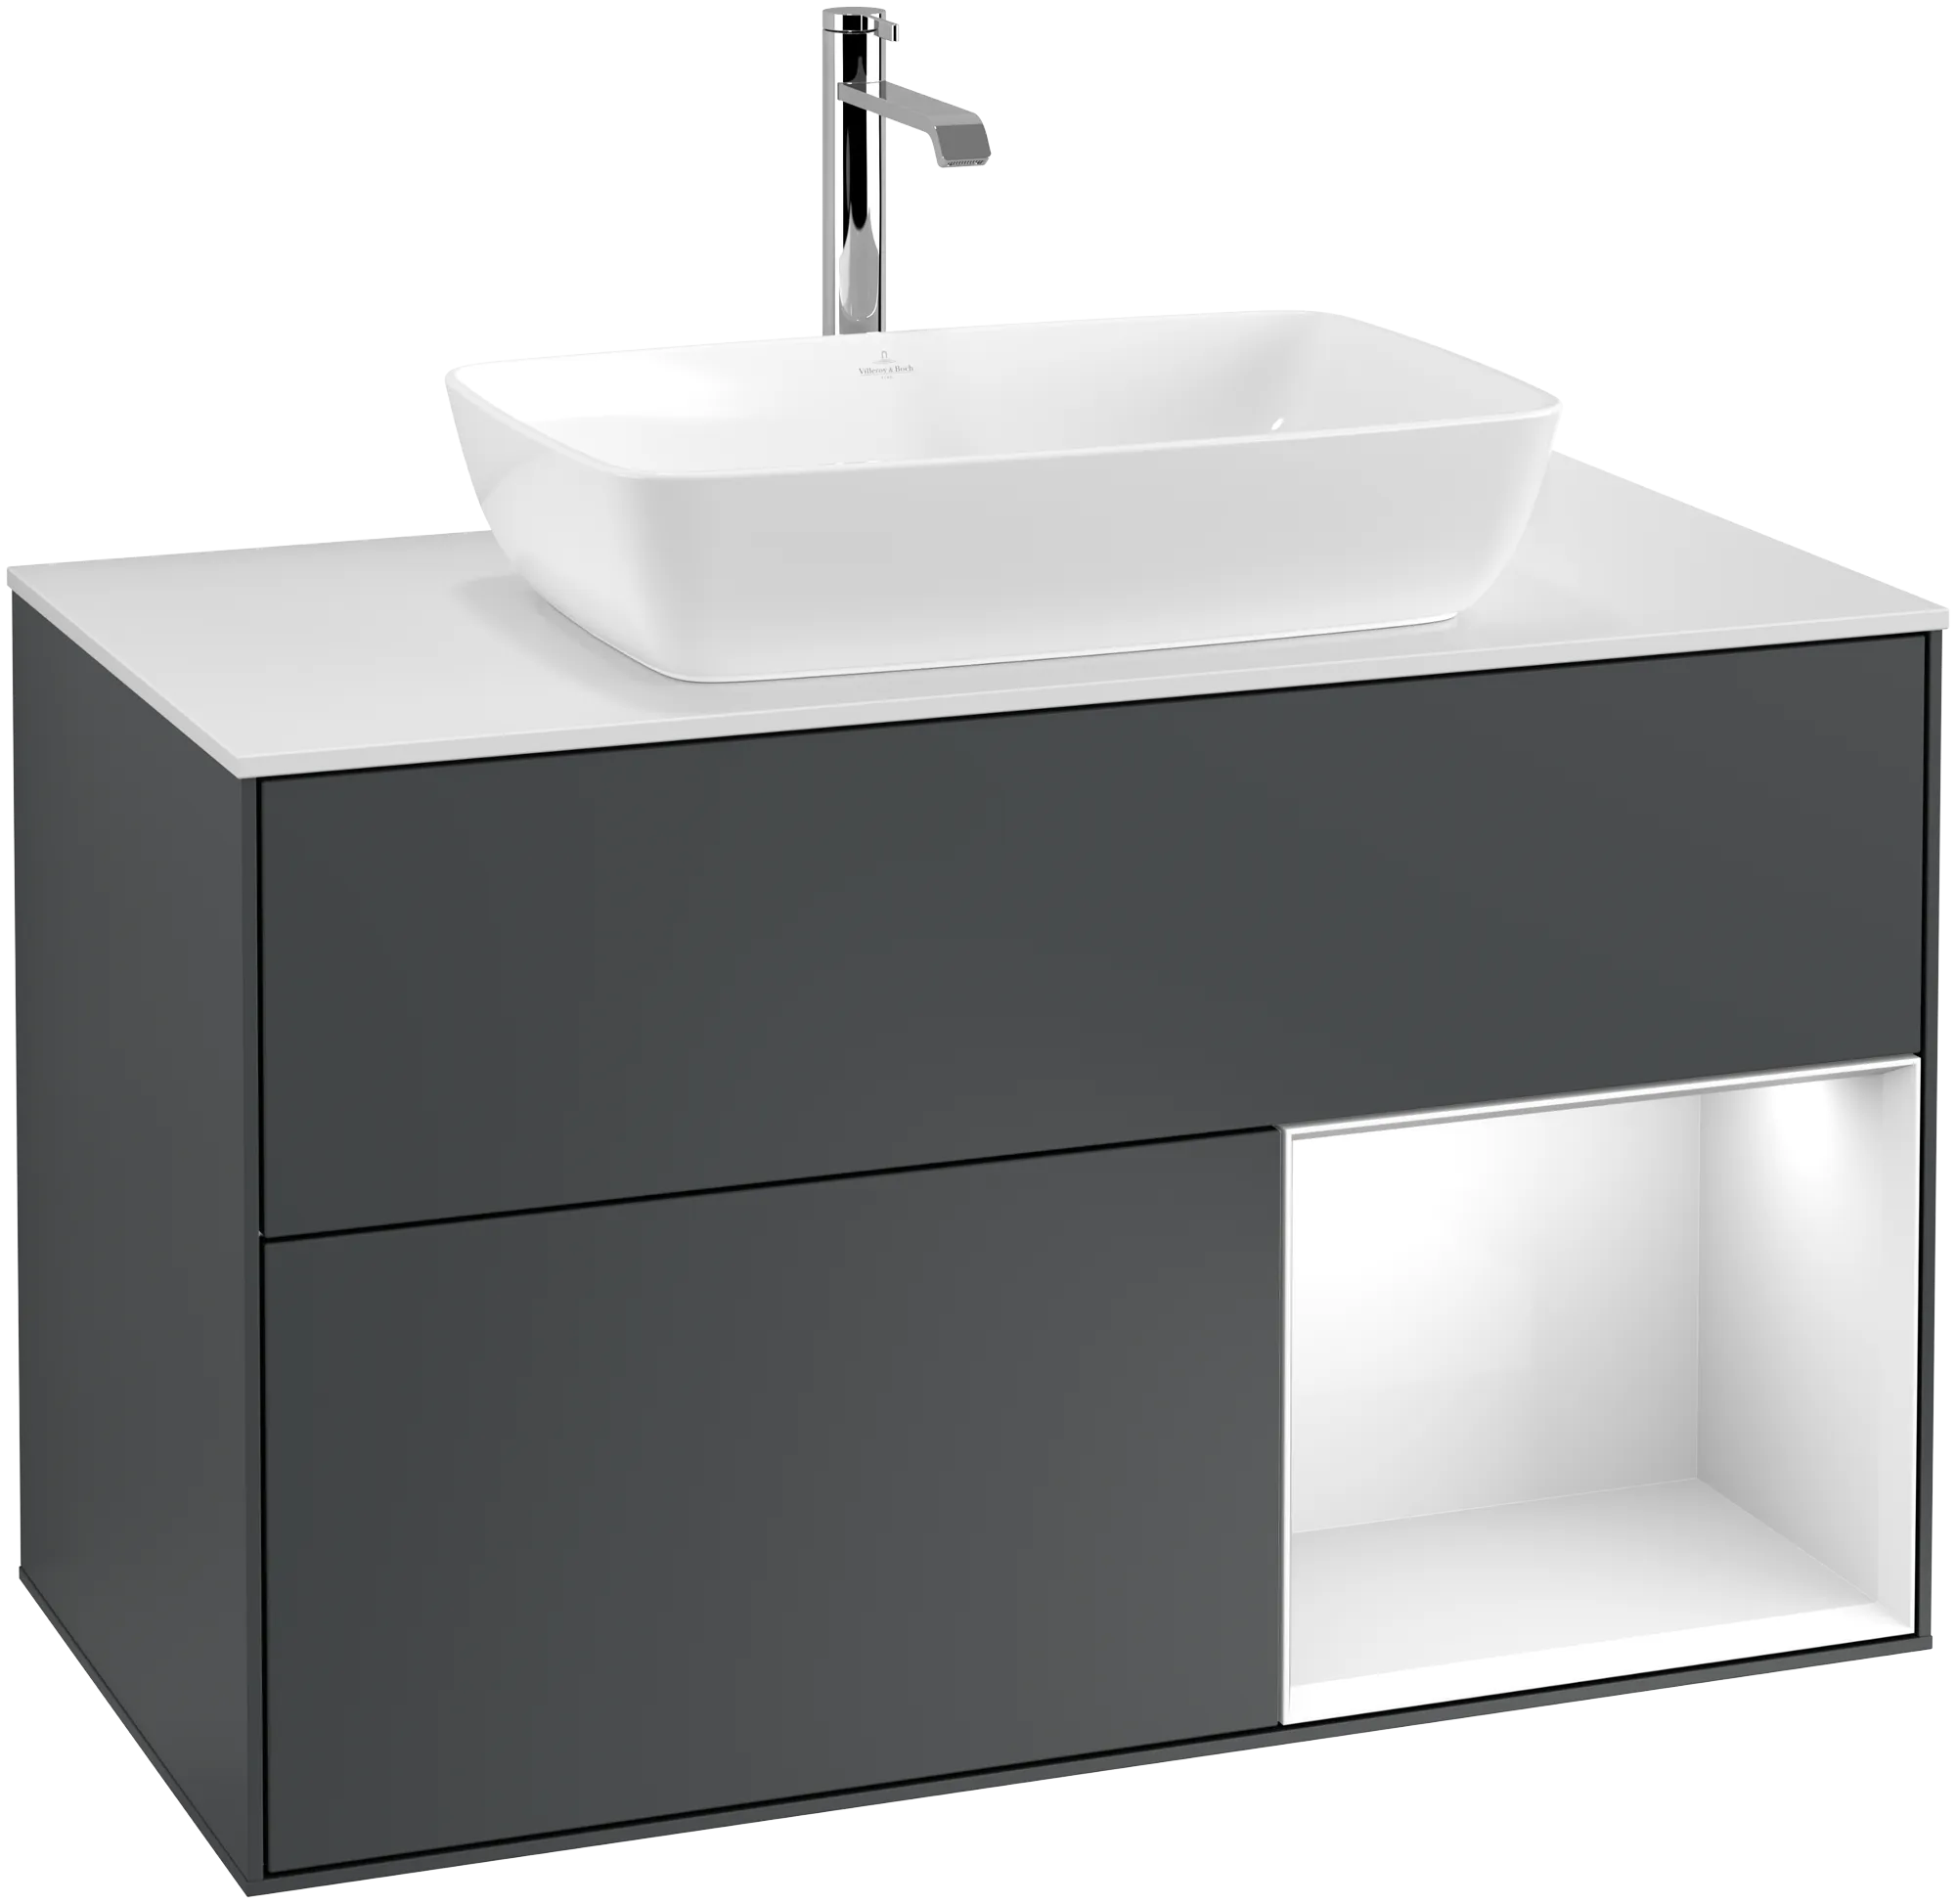 Picture of VILLEROY BOCH Finion Vanity unit, with lighting, 2 pull-out compartments, 1000 x 603 x 501 mm, Midnight Blue Matt Lacquer / Glossy White Lacquer / Glass White Matt #G781GFHG